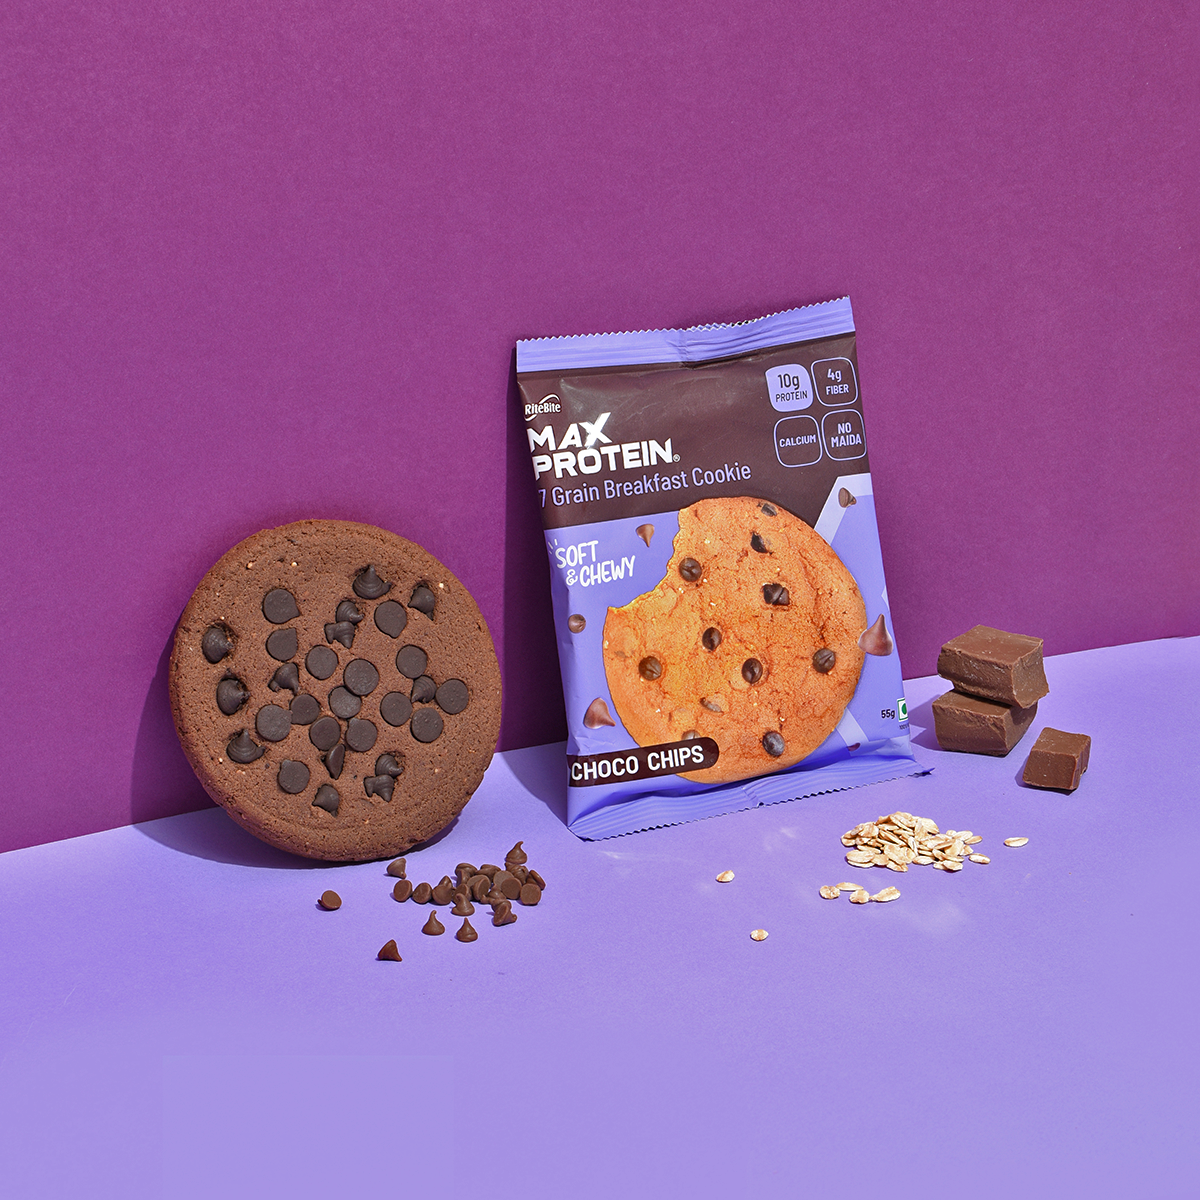 Max Protein Choco Chips Cookie